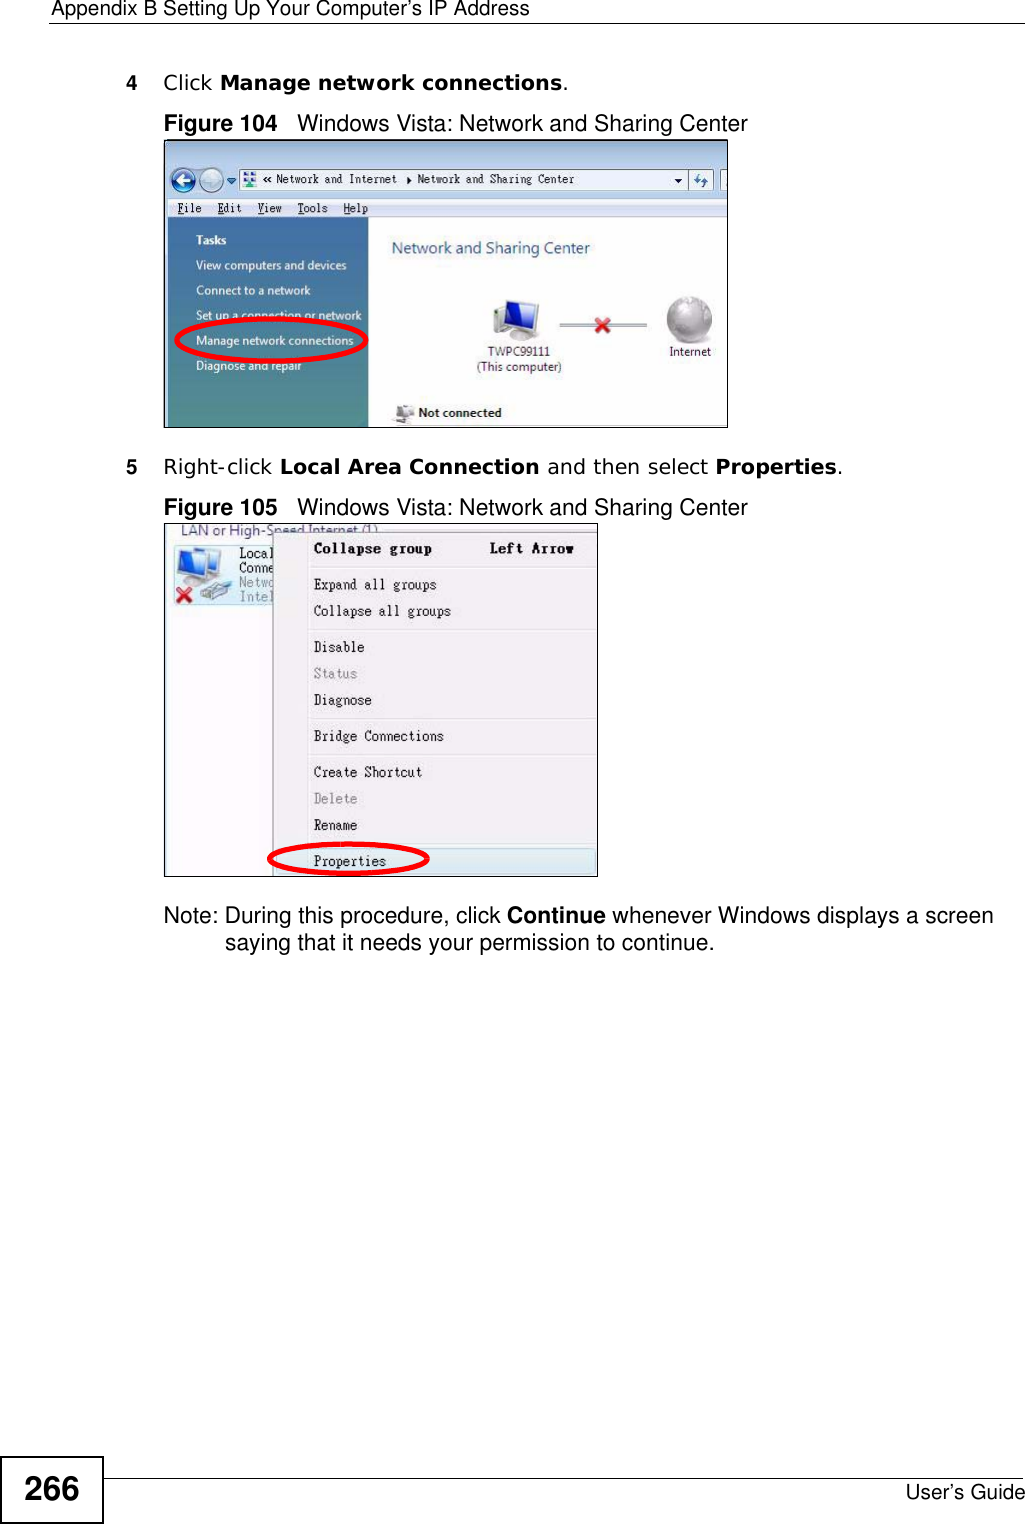 Appendix B Setting Up Your Computer’s IP AddressUser’s Guide2664Click Manage network connections.Figure 104   Windows Vista: Network and Sharing Center5Right-click Local Area Connection and then select Properties.Figure 105   Windows Vista: Network and Sharing CenterNote: During this procedure, click Continue whenever Windows displays a screen saying that it needs your permission to continue.